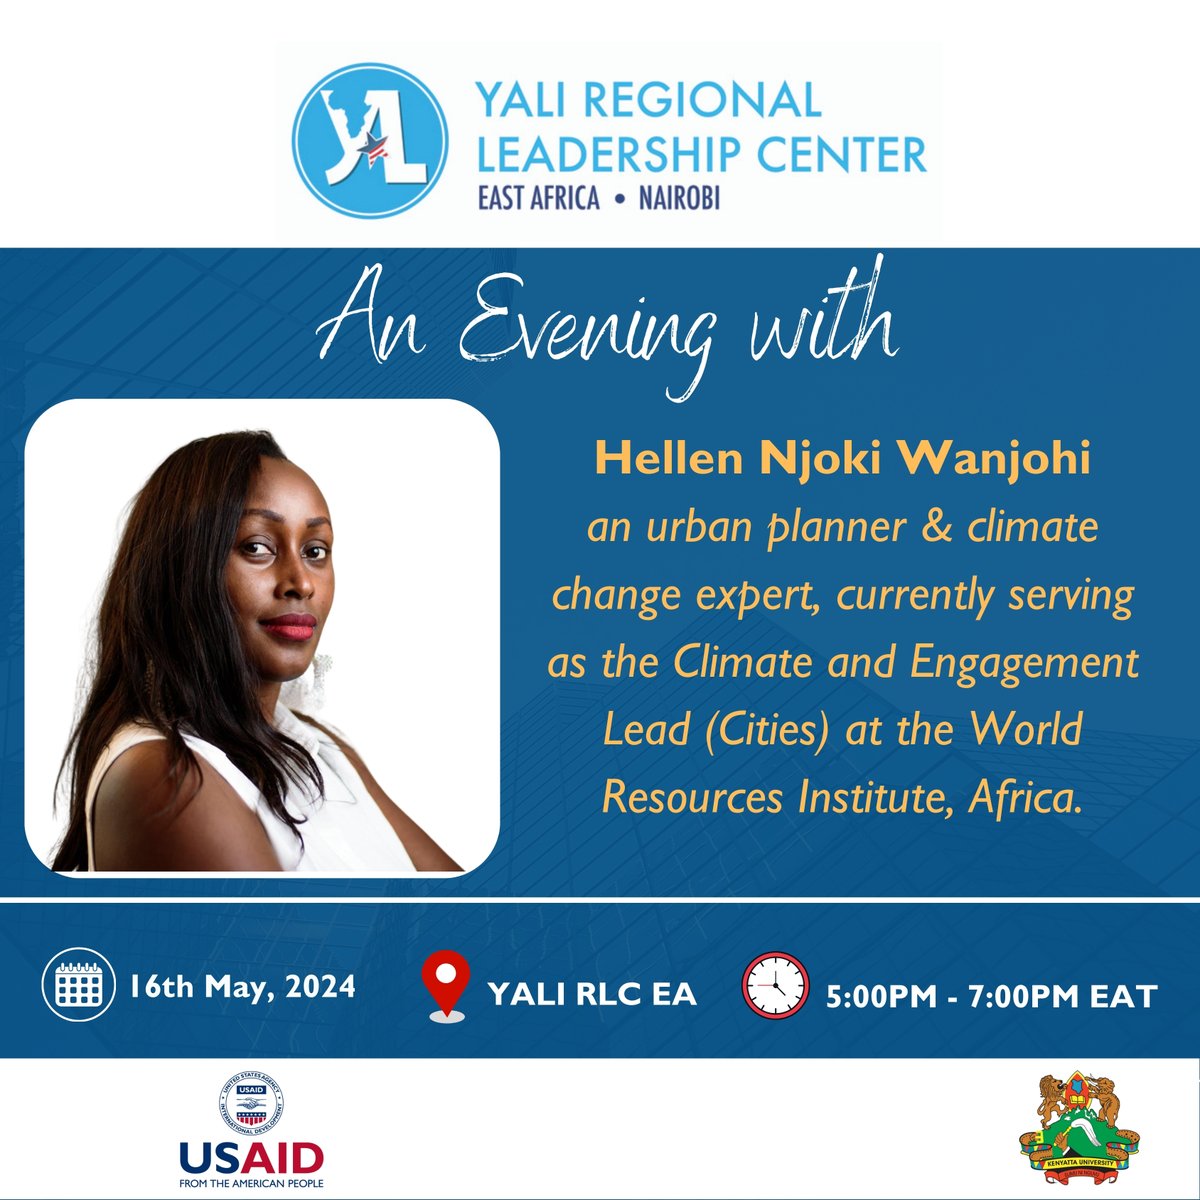 Excited to host Hellen Wanjohi today! 
As Climate & Engagement Lead at WRIClimate Africa, she's driving positive change in urban resilience & climate action. Join us for an evening session with this inspiring urban planner & climate expert! #ClimateAction #UrbanResilience